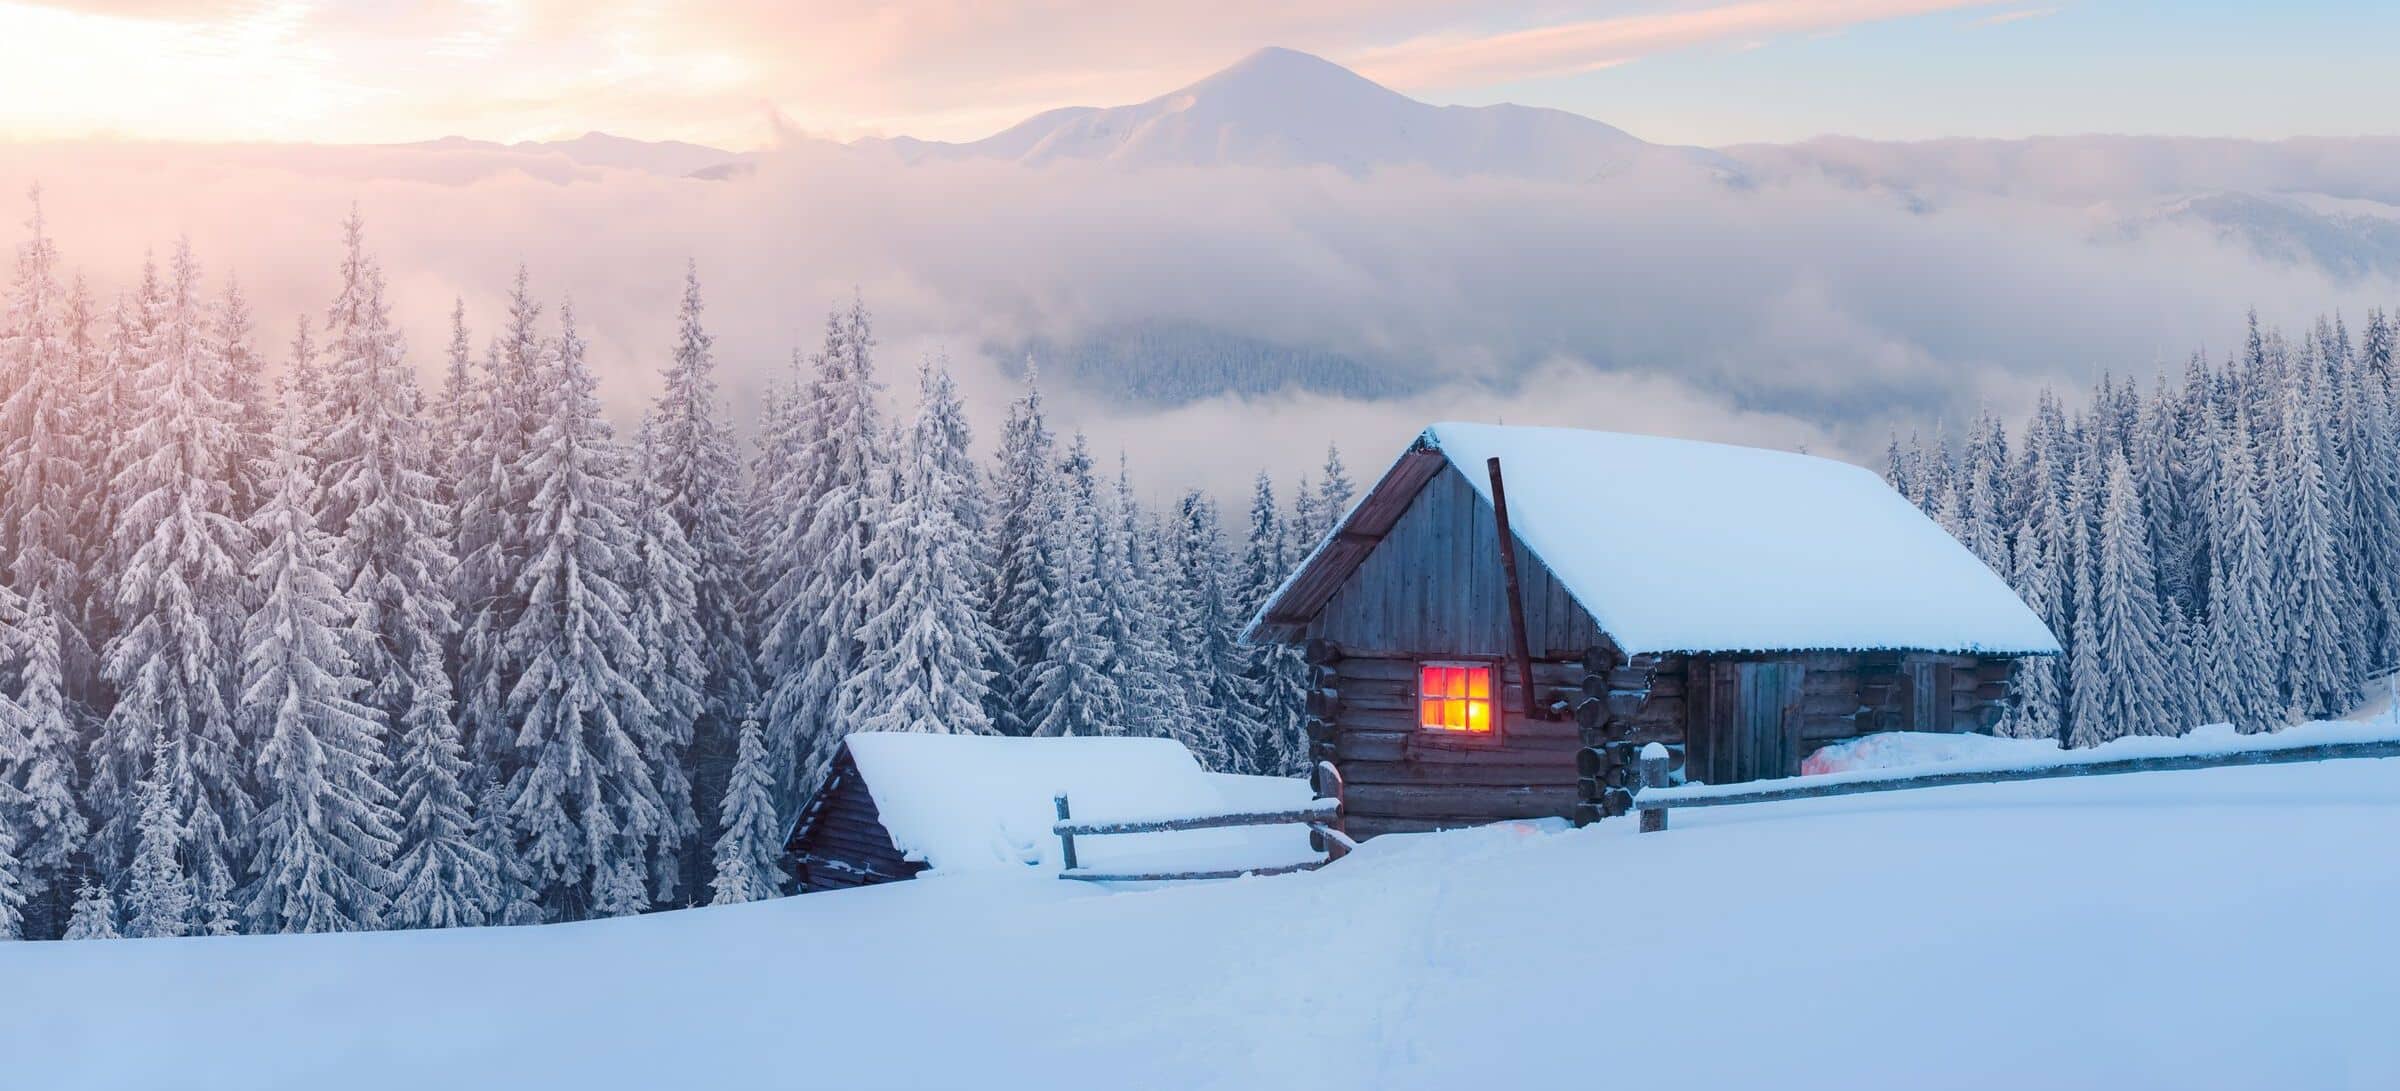 Fantastic winter landscape with wooden house in snowy mountains ©Ivan Kmit - stock.adobe.com